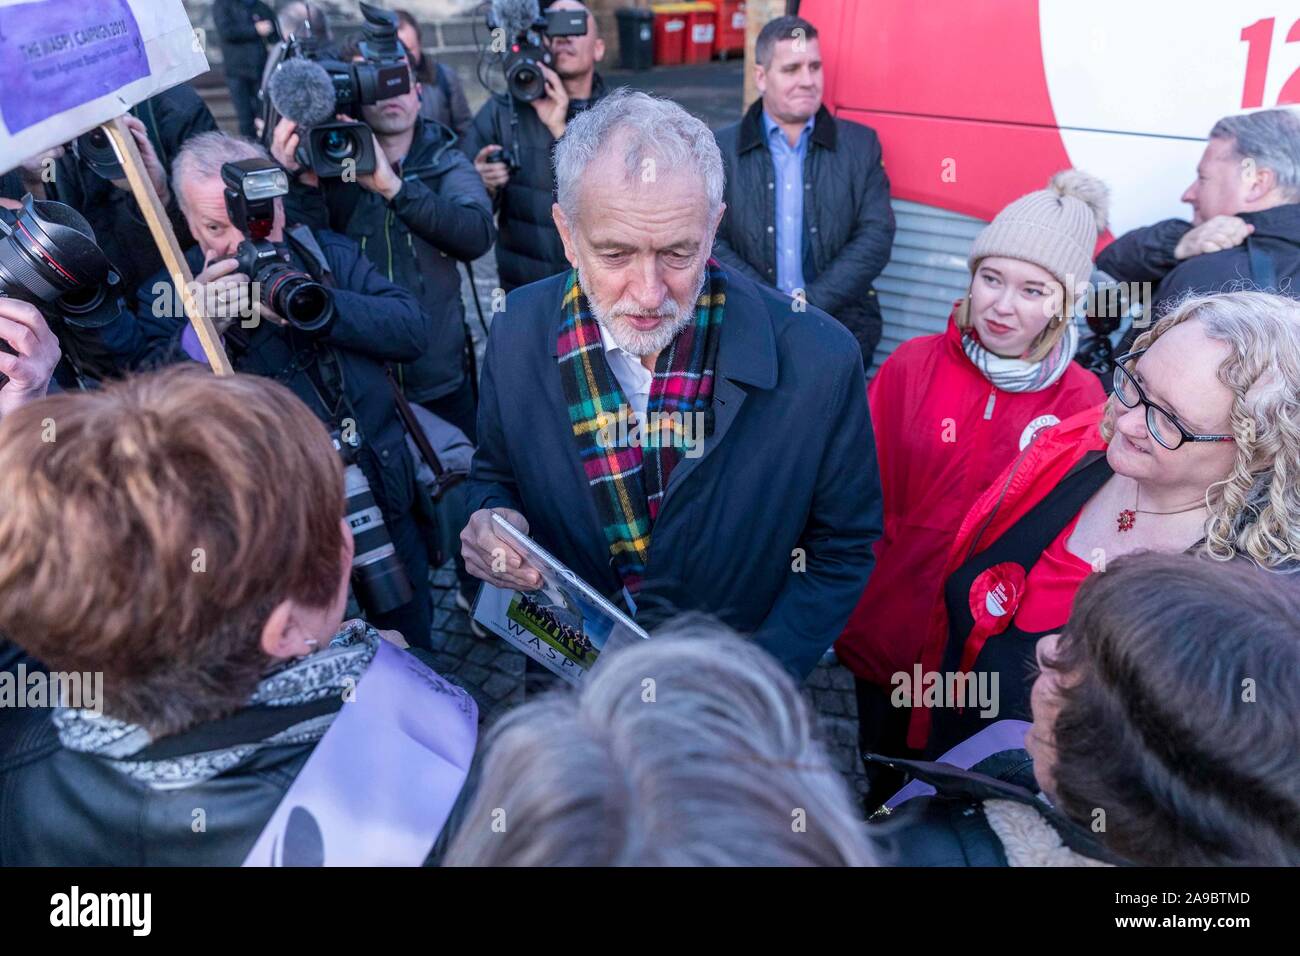 Linlithgow, United Kingdom. 14 November, 2019 Pictured: Jeremy Corbyn at Linlithgow Cross in Linlithgow. Labour leader, Jeremy Corbyn continues his visit to Scotland as part of his UK Election campaign. Credit: Rich Dyson/Alamy Live News Stock Photo